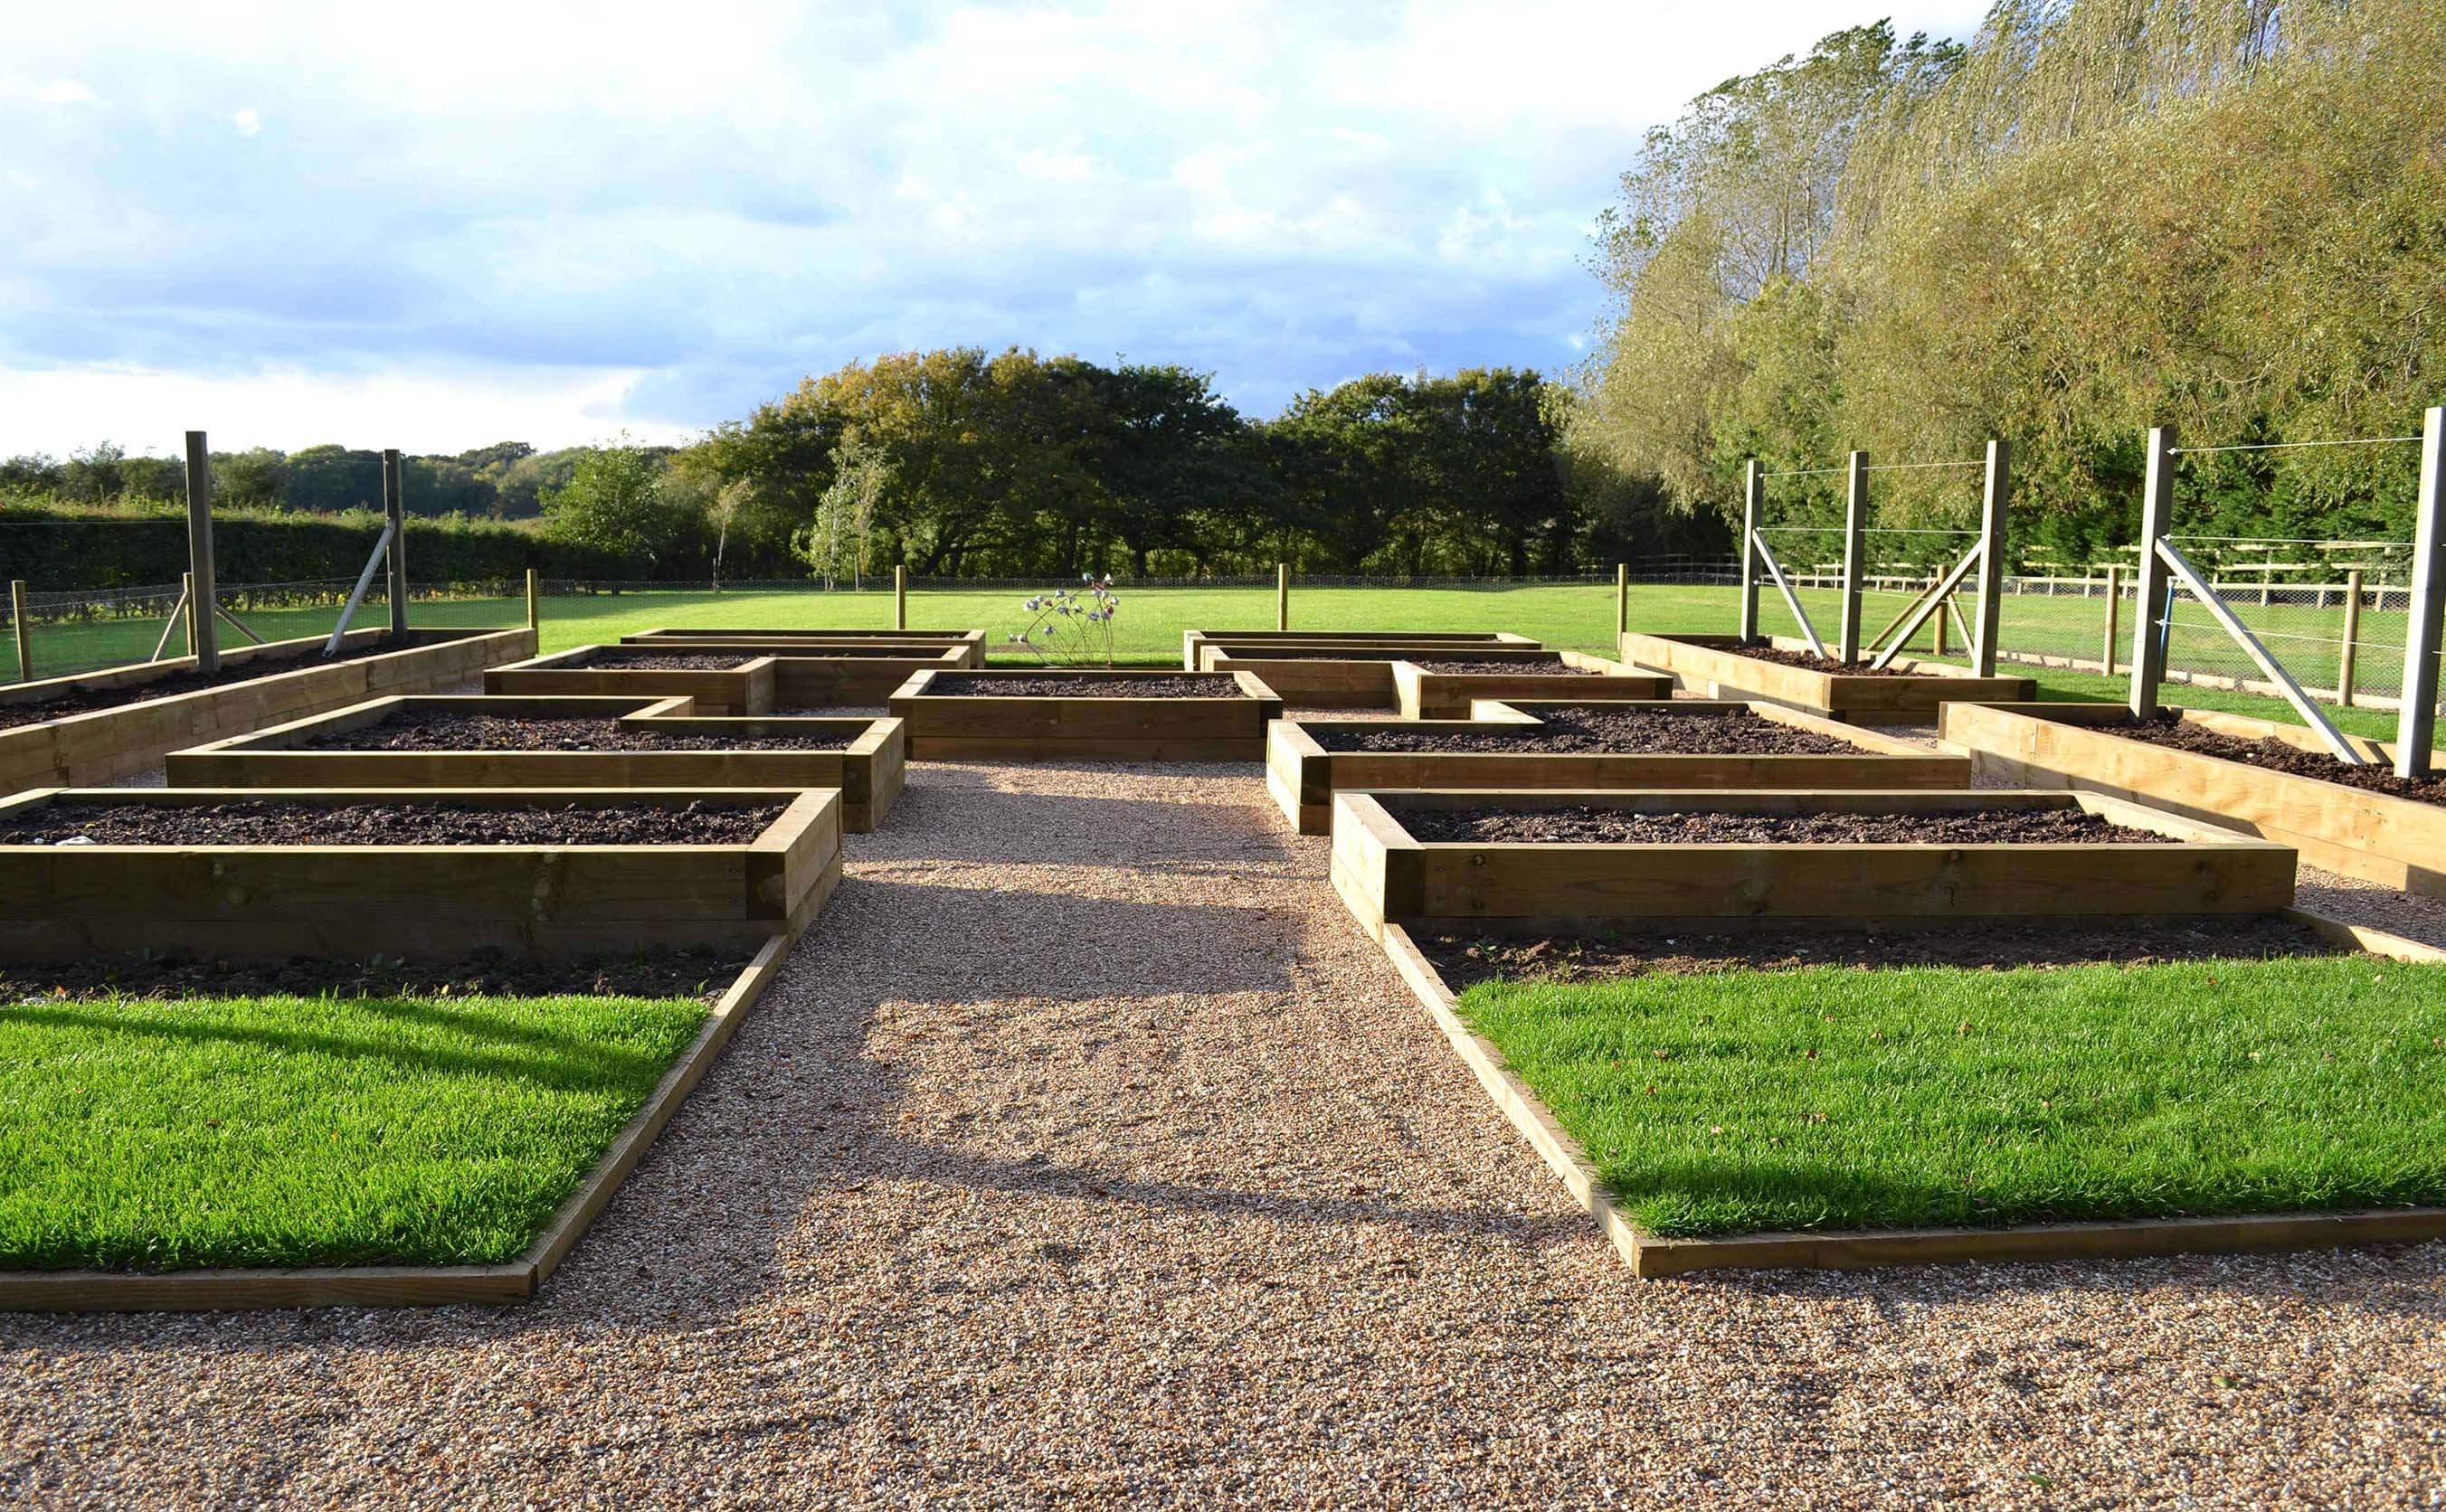 Potager central view showing raised beds created from sleepers